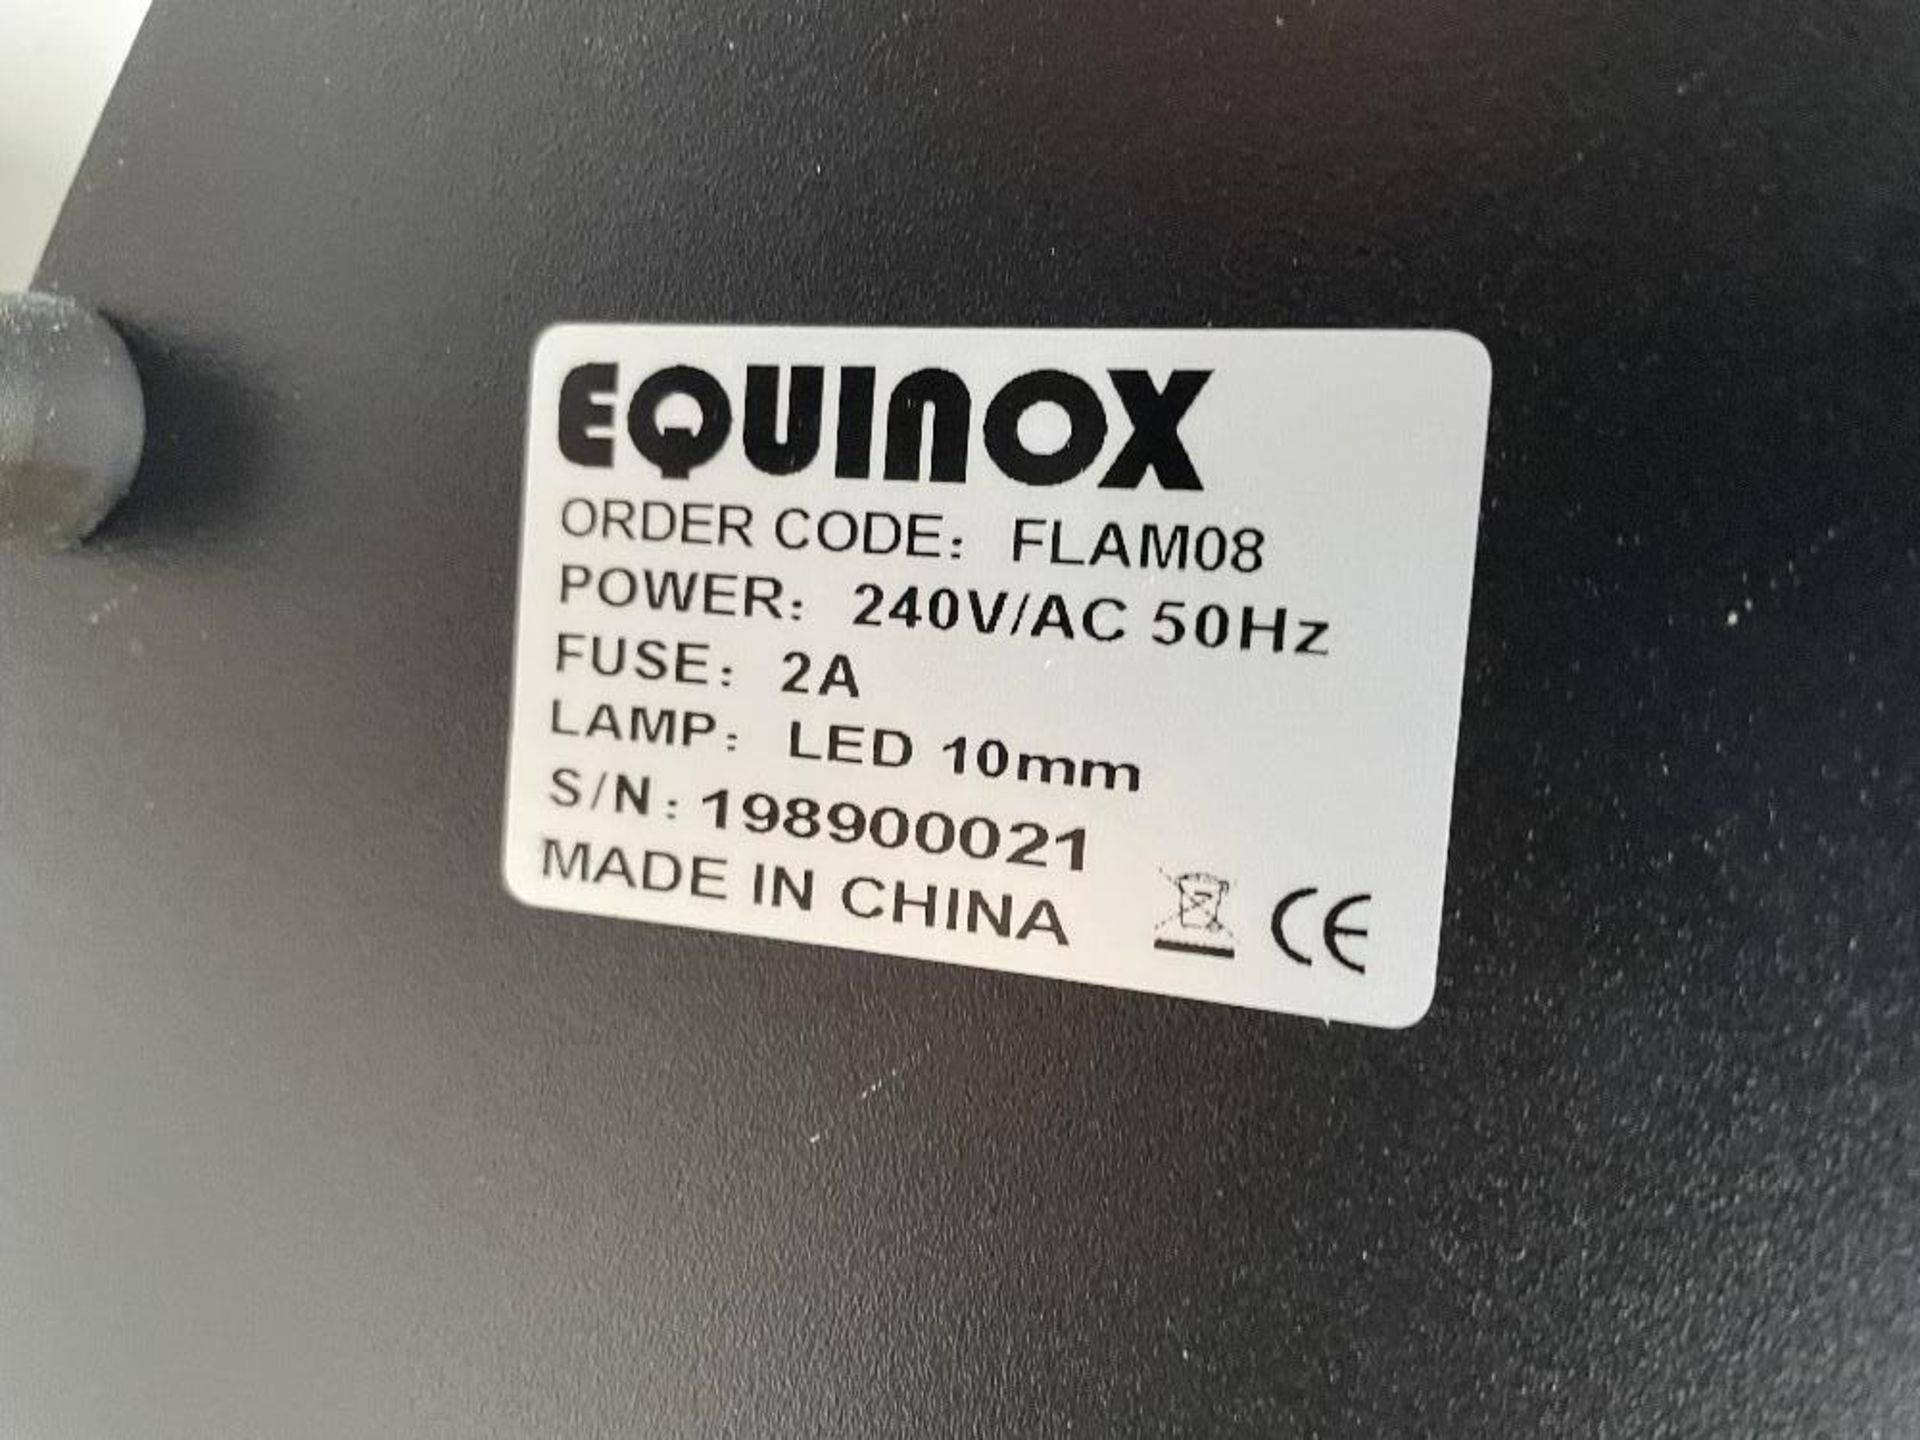 2 x Equinox FLAM08 1.5m Flame Effect Lights - Image 7 of 7